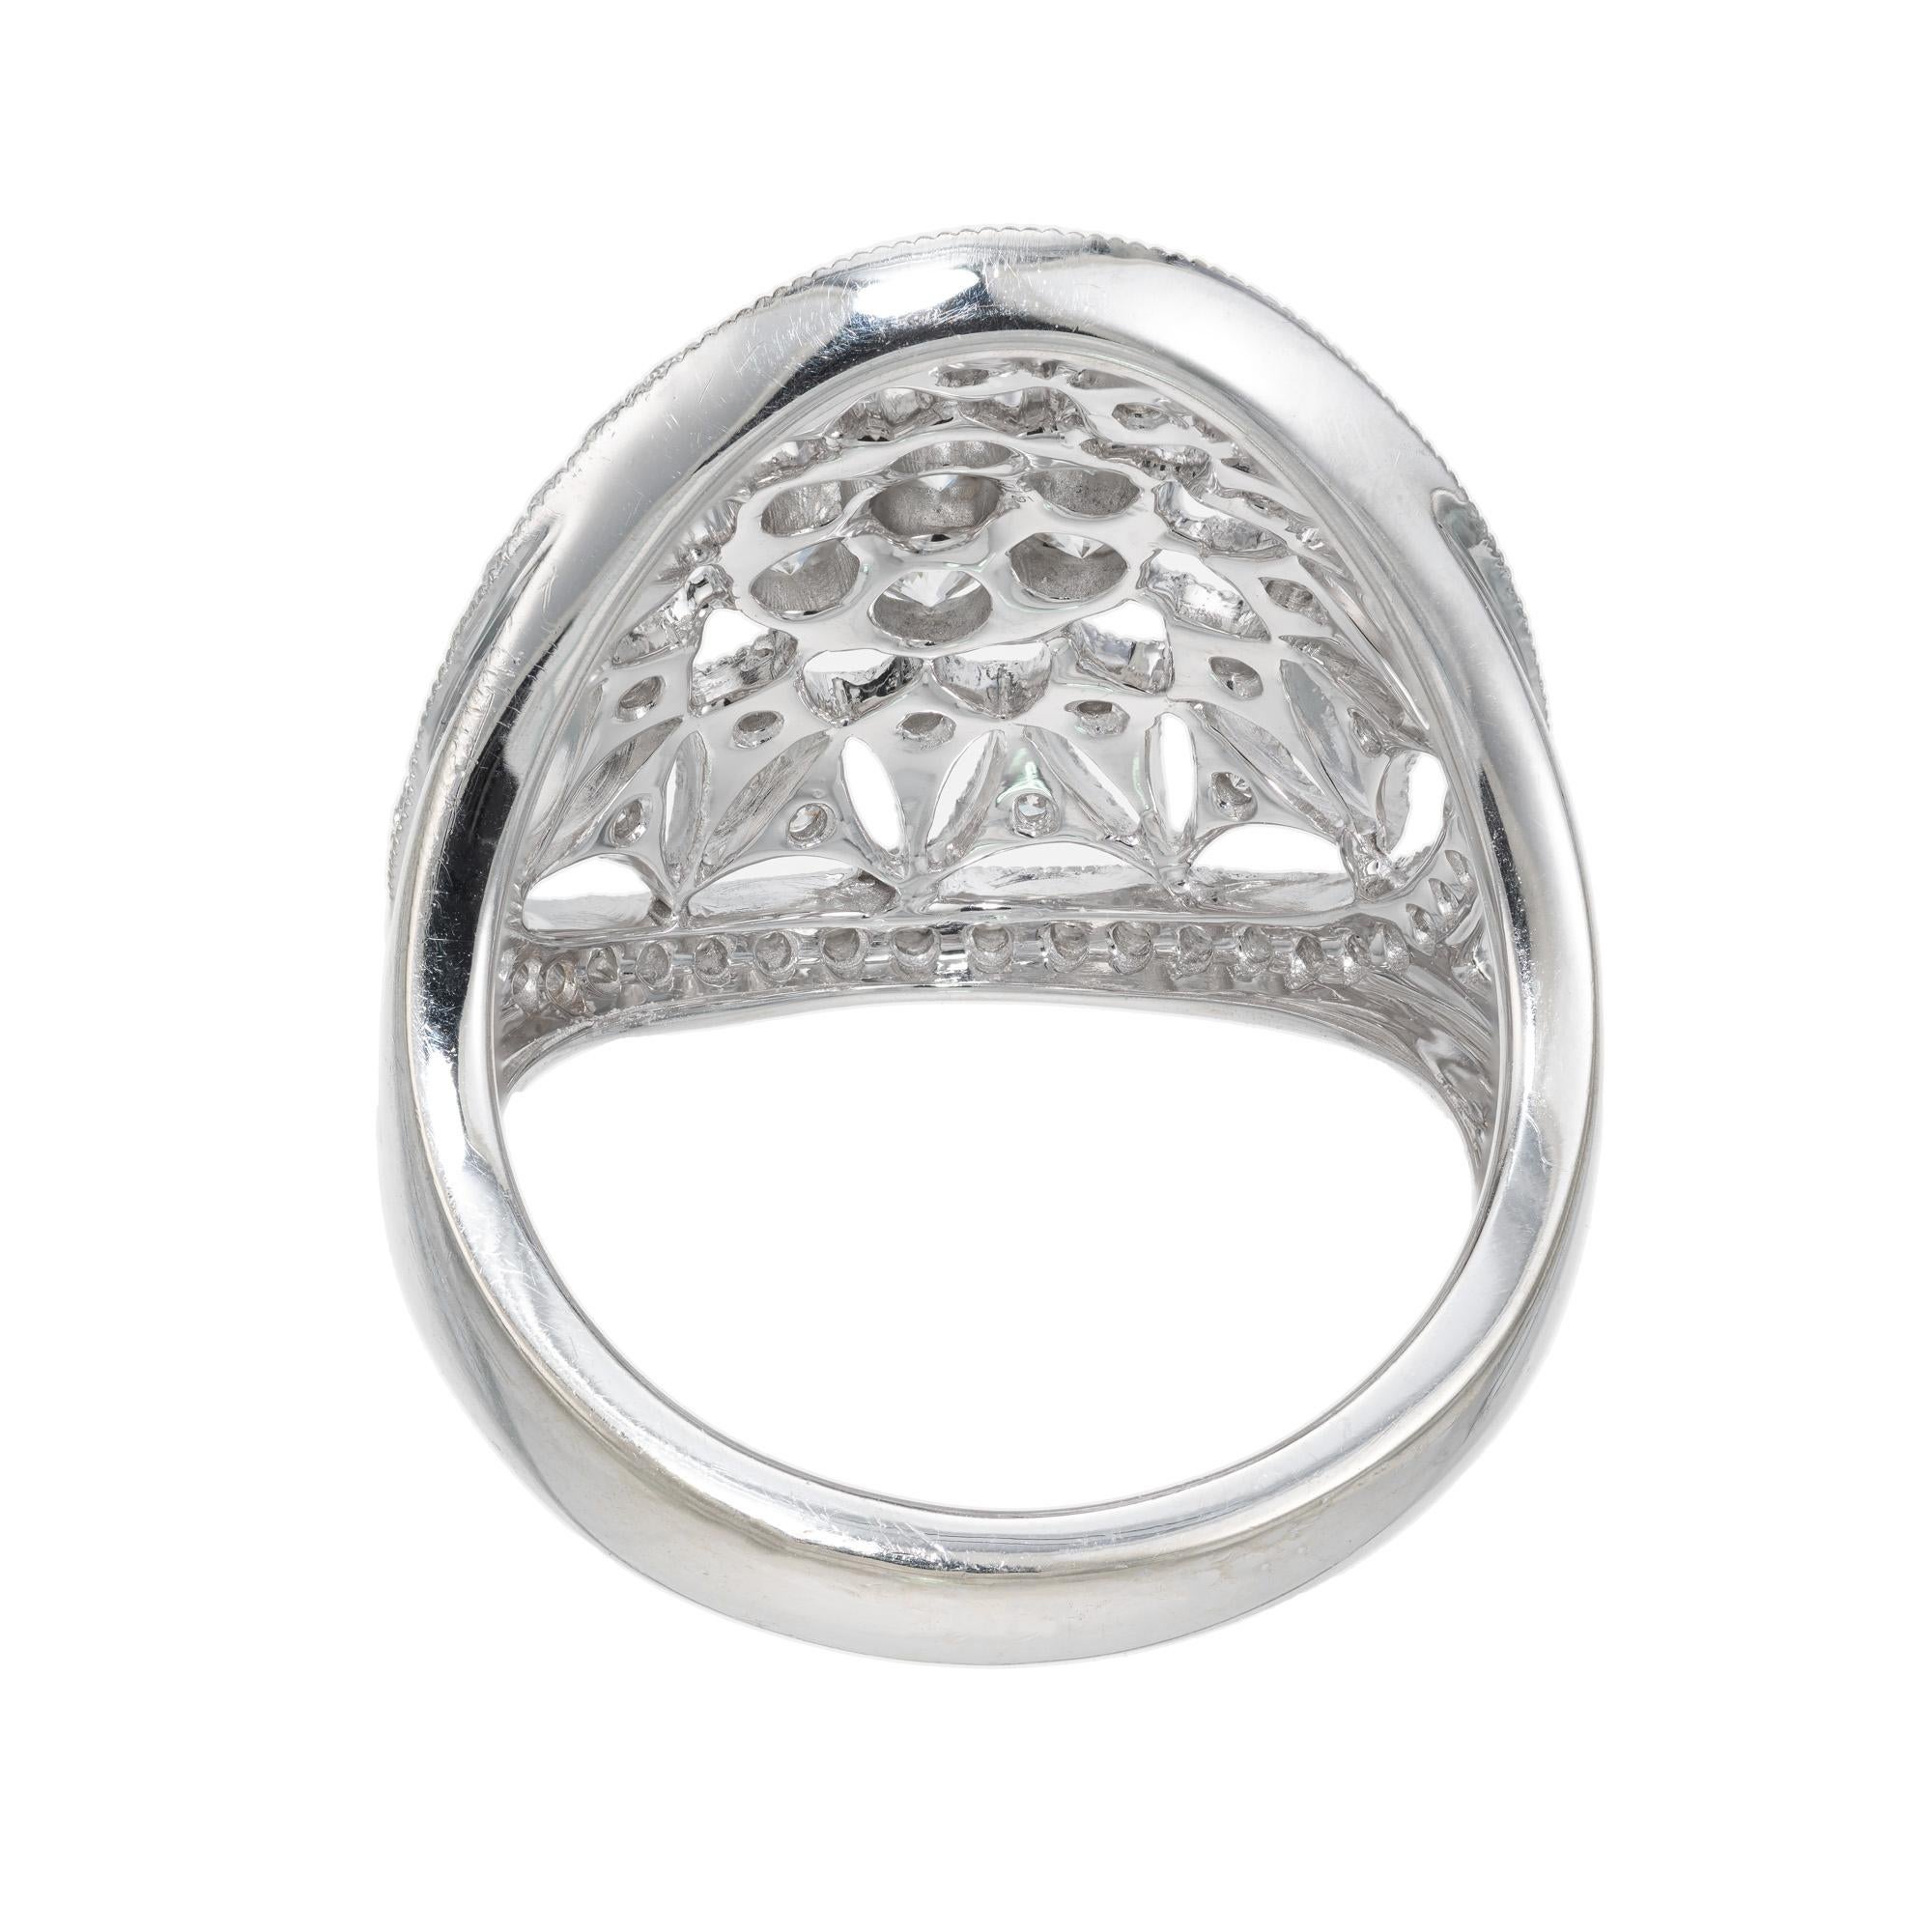 Peter Suchy 1.50 Carat Round Diamond White Gold Domed Cocktail Ring In New Condition For Sale In Stamford, CT